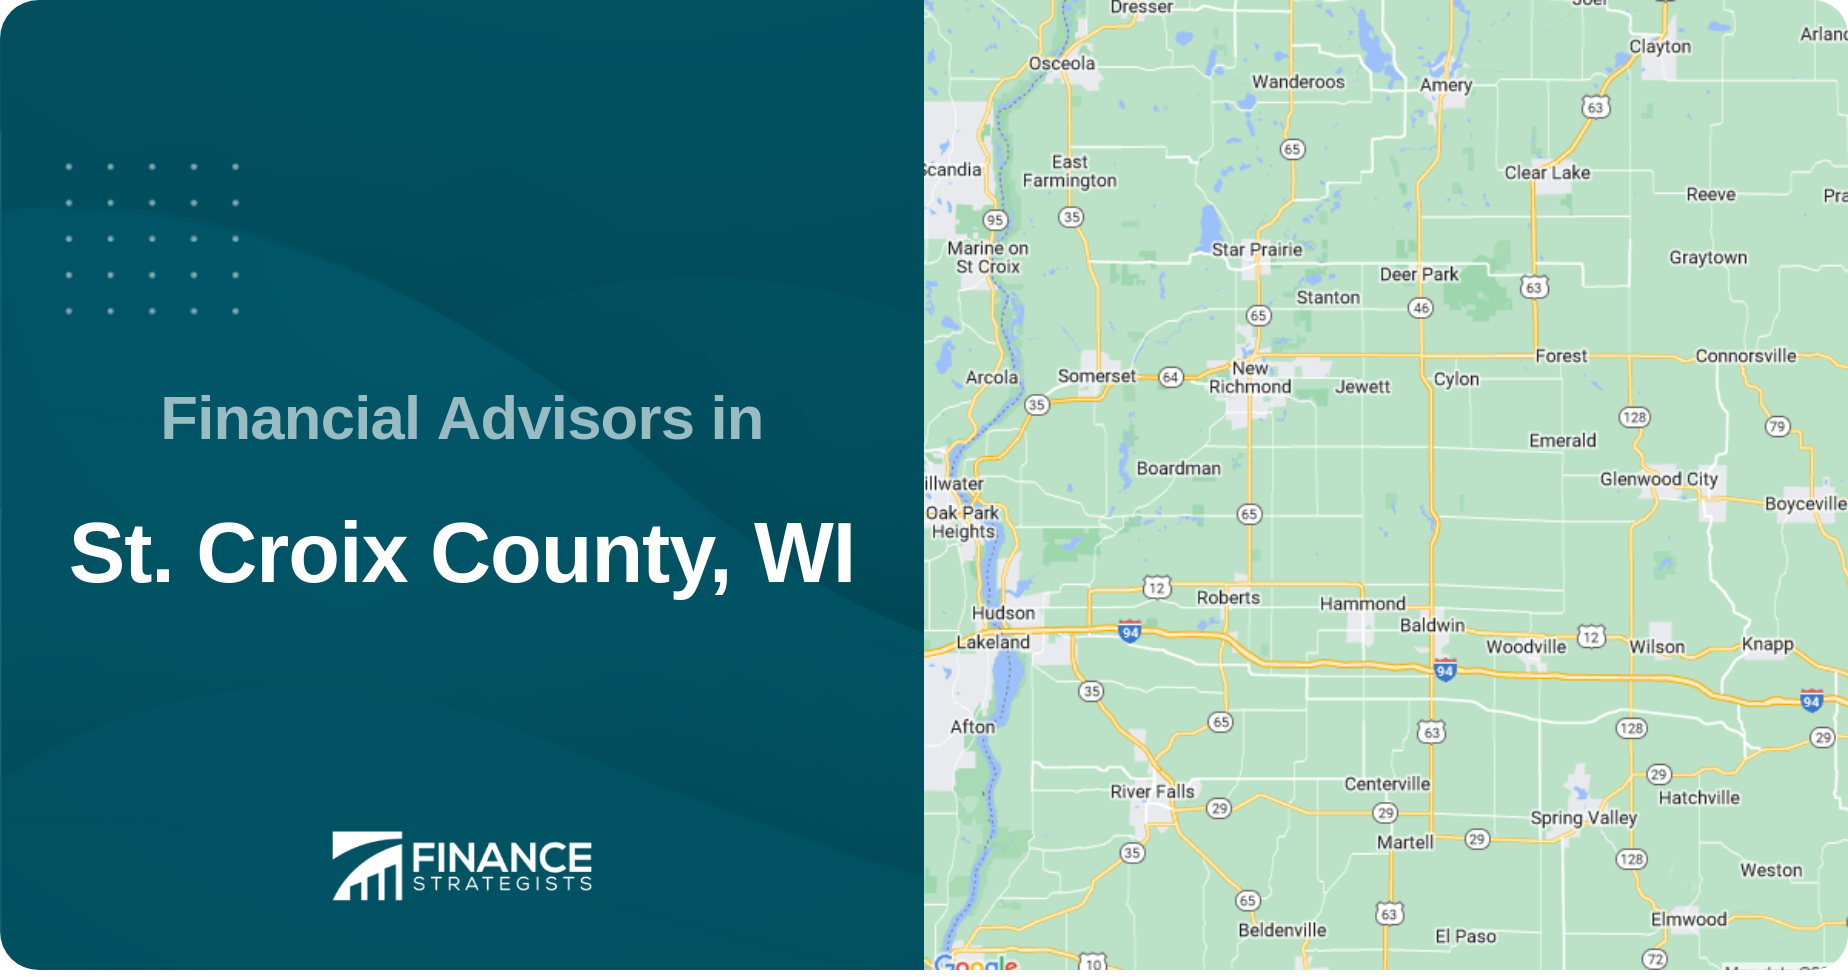 Financial Advisors in St. Croix County, WI